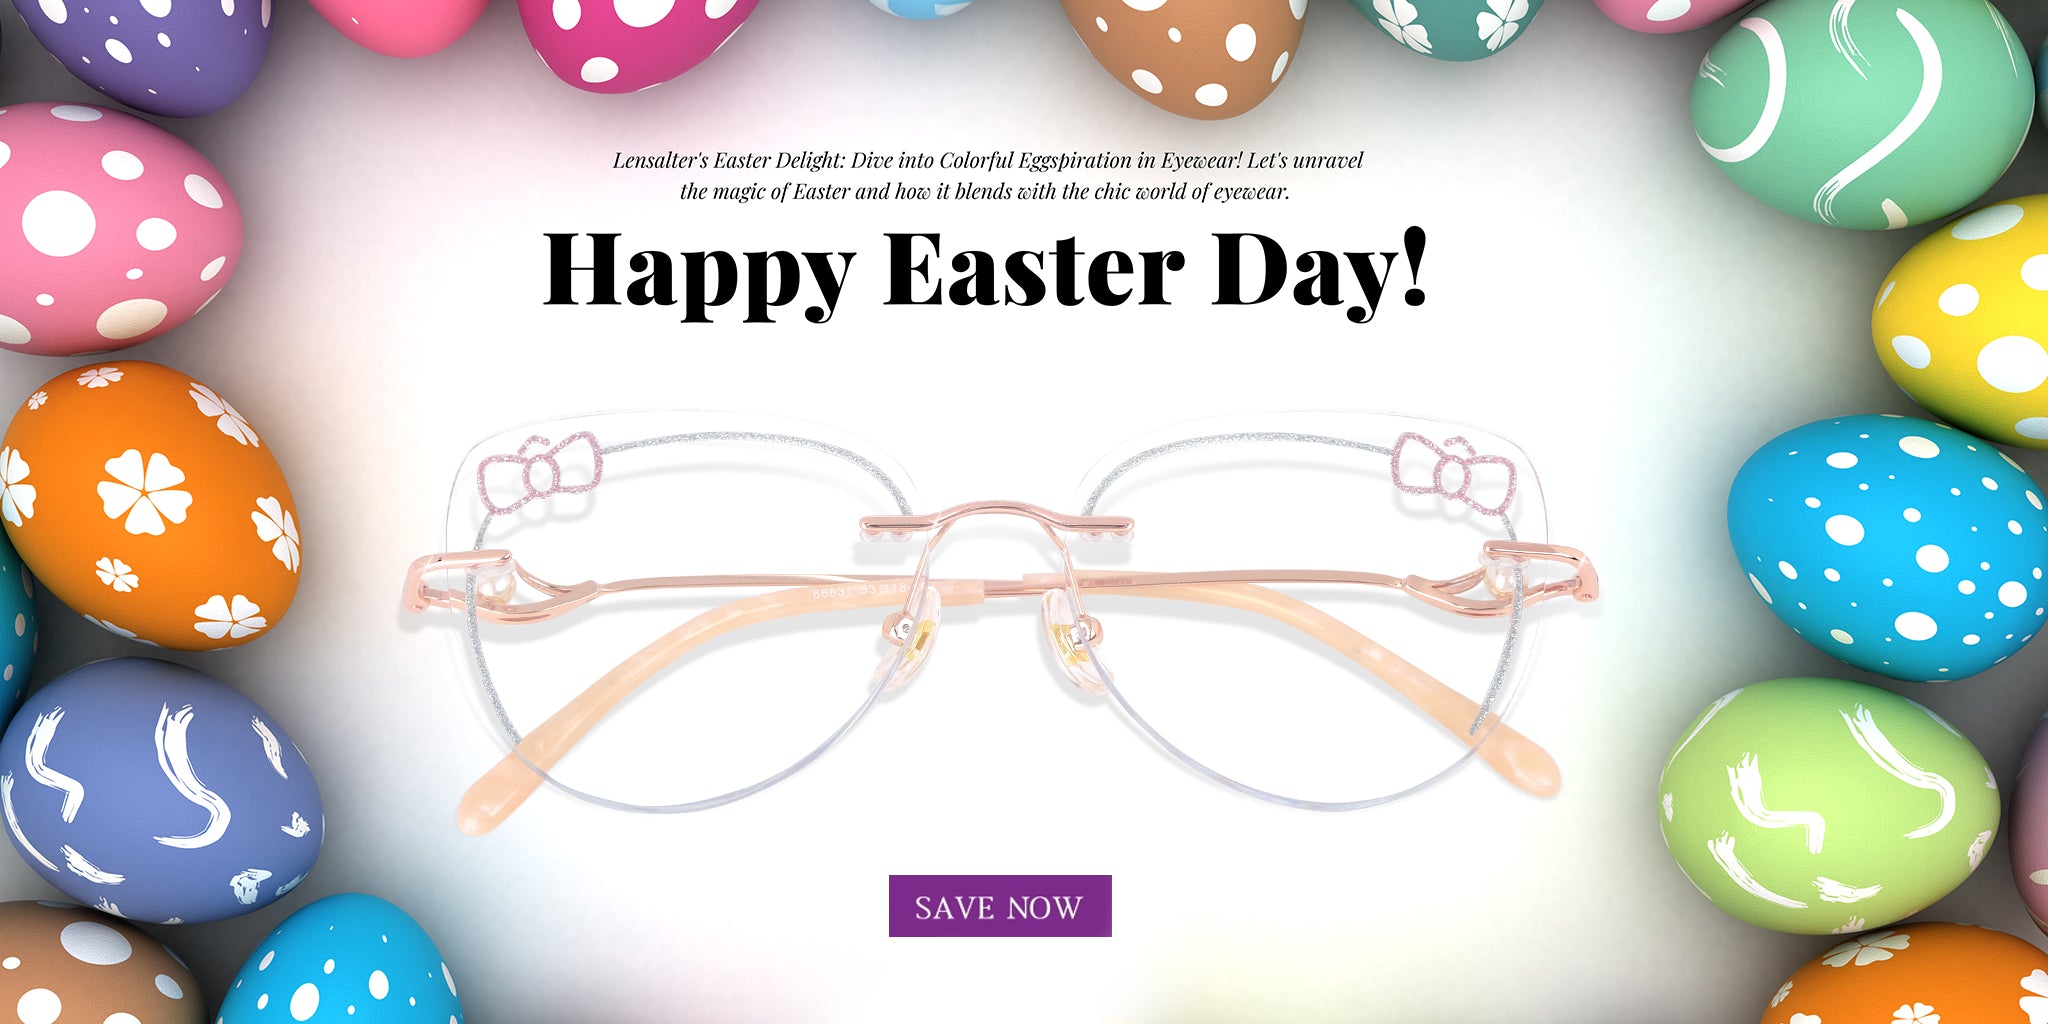 Lensalter's Easter Delight: Dive into Colorful Eggspiration in Eyewear!